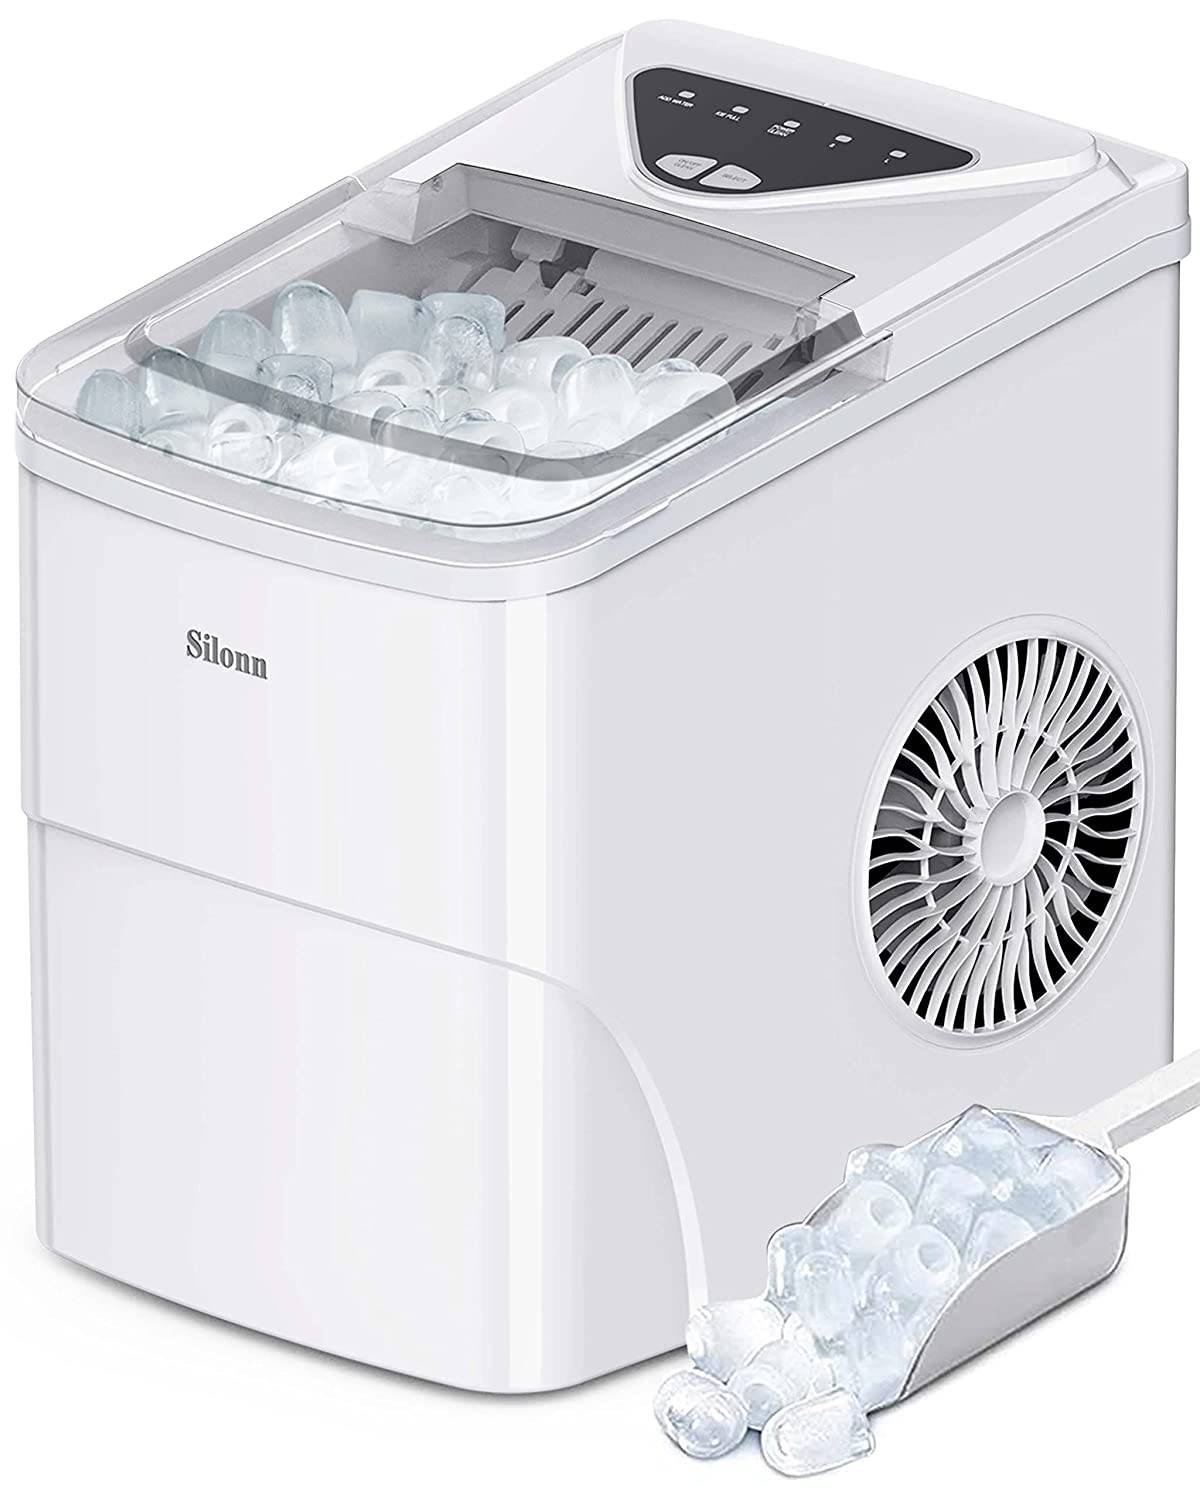 Countertop Ice Makers ,33Lbs in 24Hrs, 9 Cubes Ready in 6-8 Mins, Self-Cleaning Portable Ice Machine with Ice Scoop and Basket